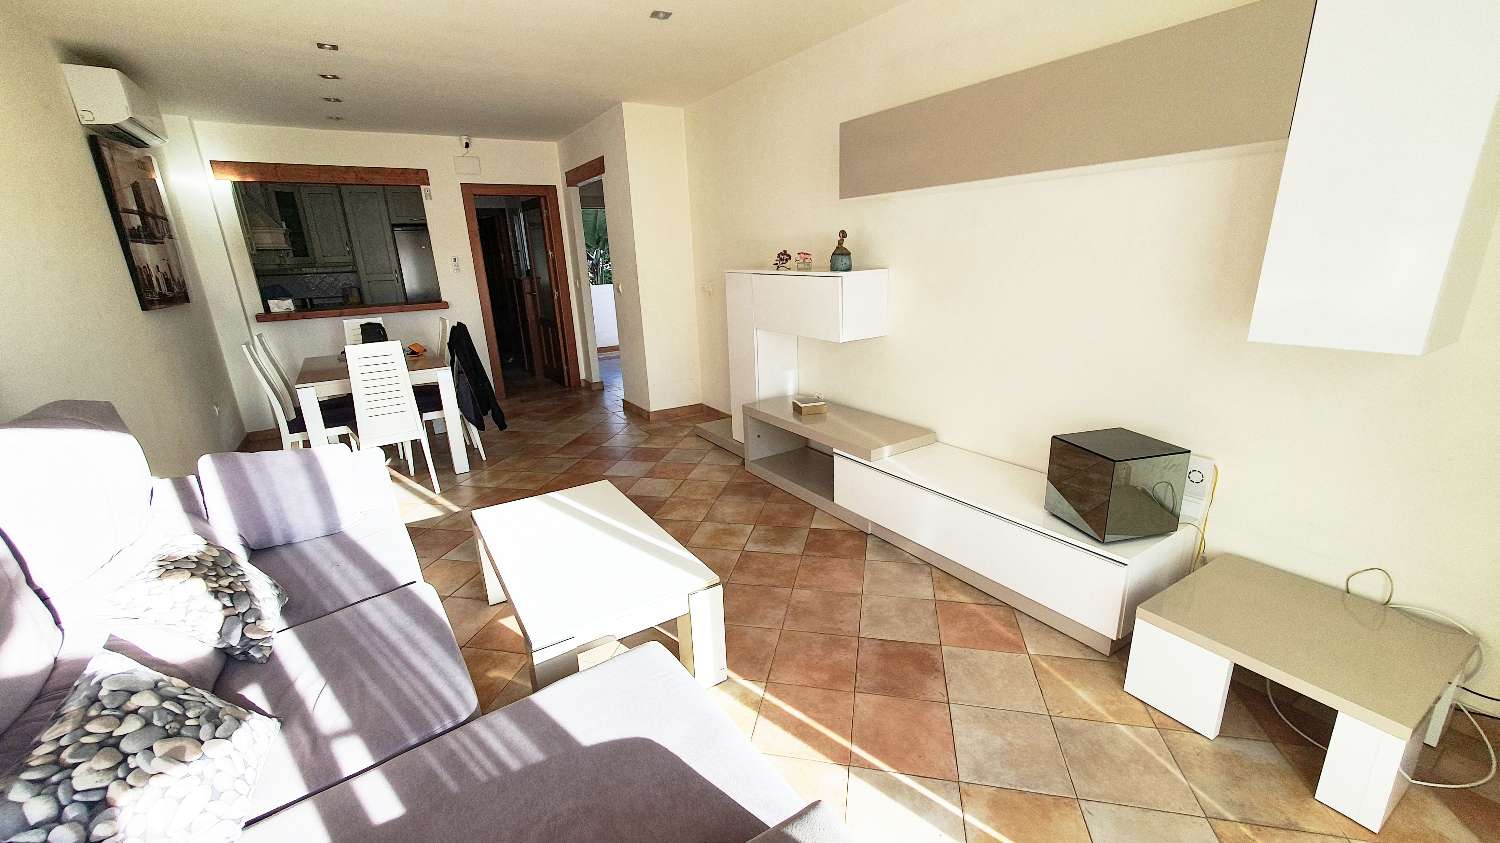 Apartment for sale in Almuñecar with large terrace and close to San Cristobal beach